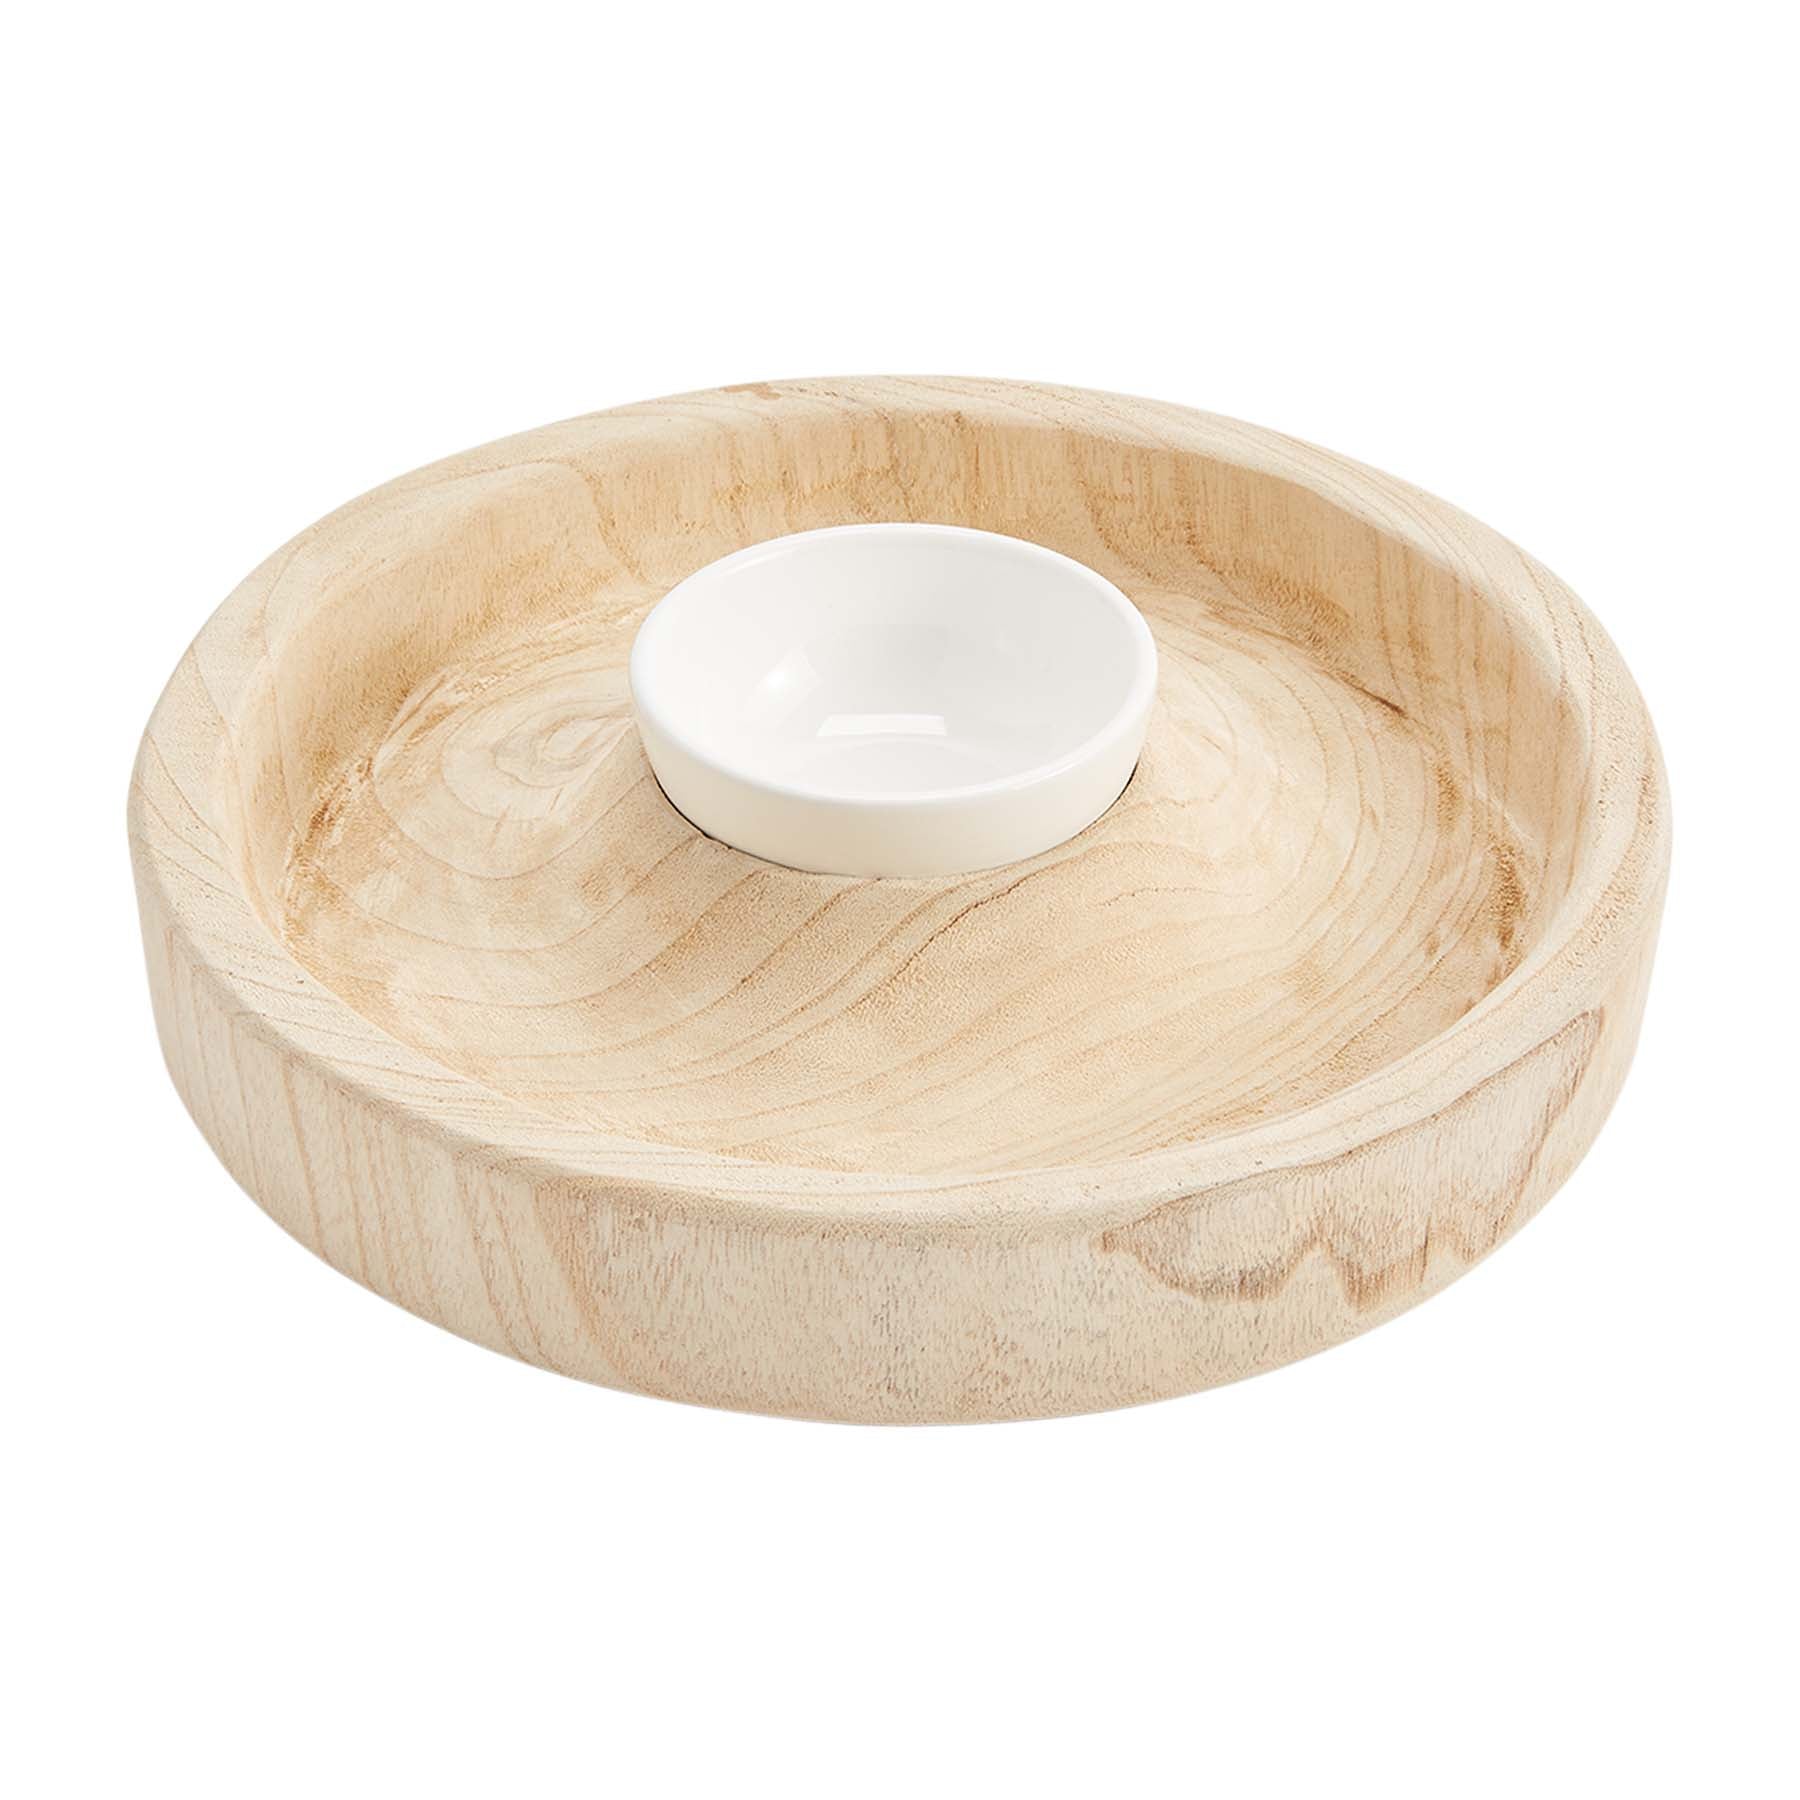 Mud Pie Paulownia Chip Ceramic Dip Bowl available at The Good Life Boutique